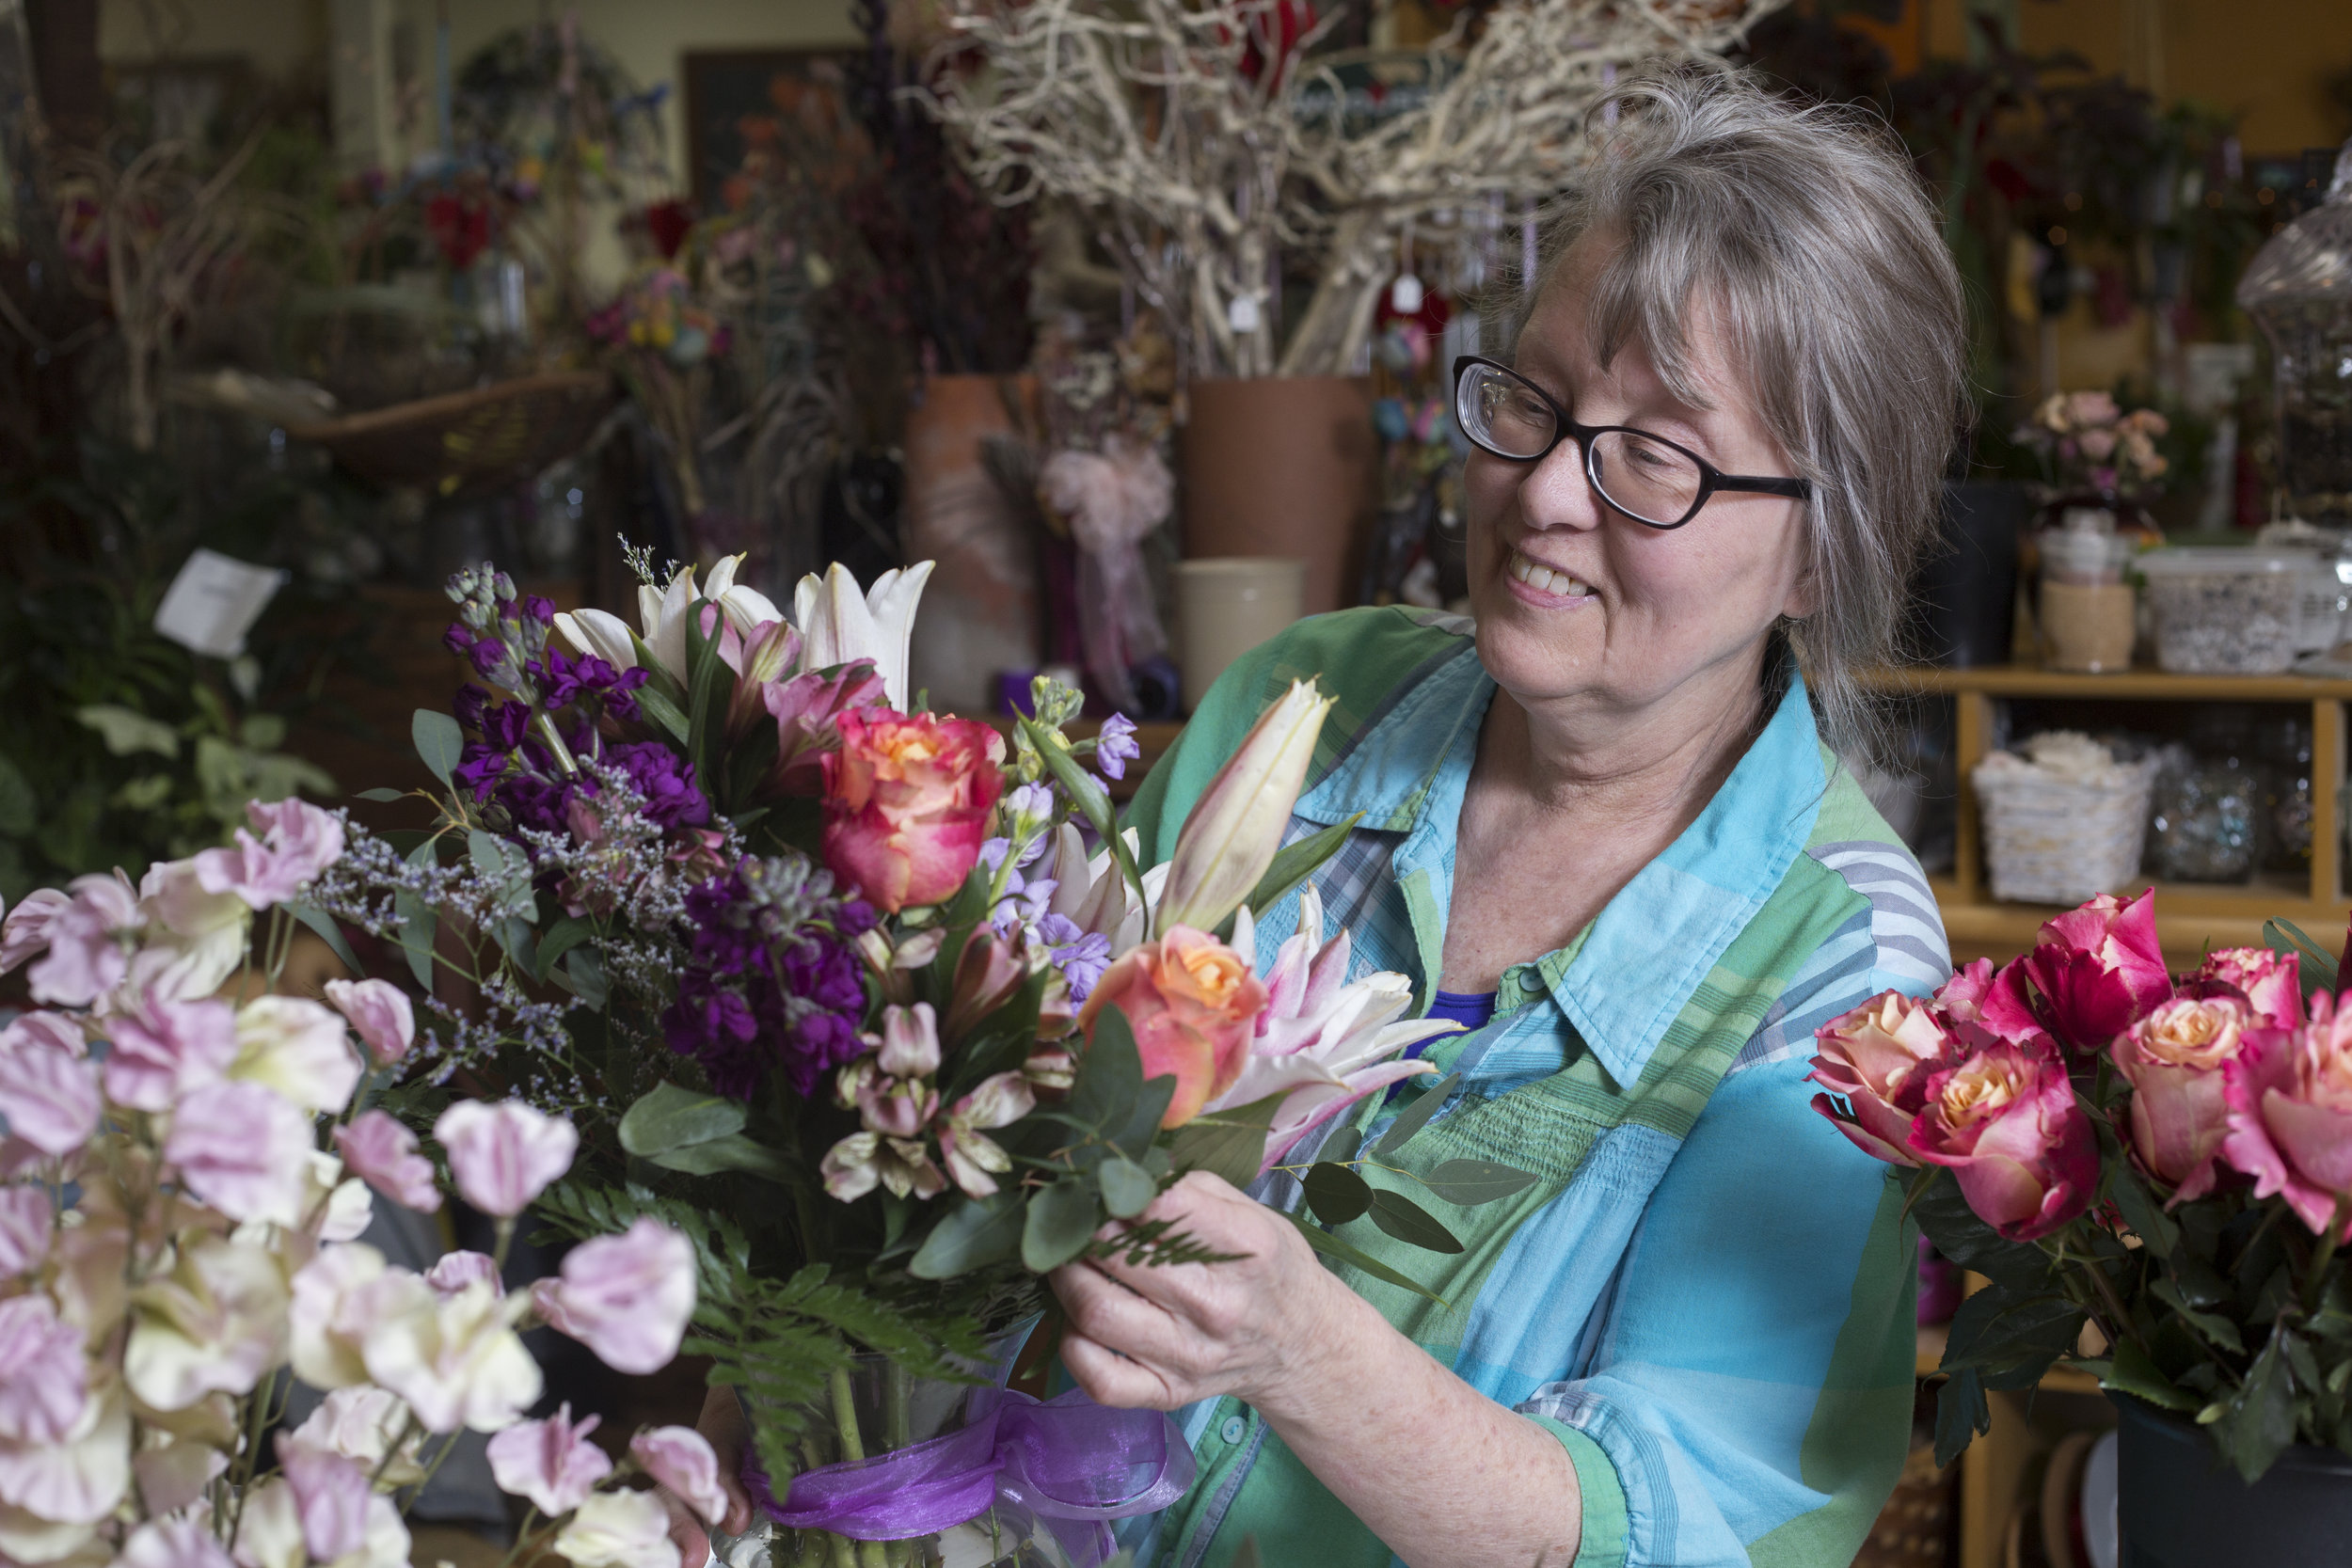  Polly Creech, the owner of Hyacinth Bean in Athens, Ohio, prepares a bouquet in her flower shop on February 11, 2017. Creech said Hyacinth Bean's busiest time of the year is around Valentine's Day, with many orders coming in online. 